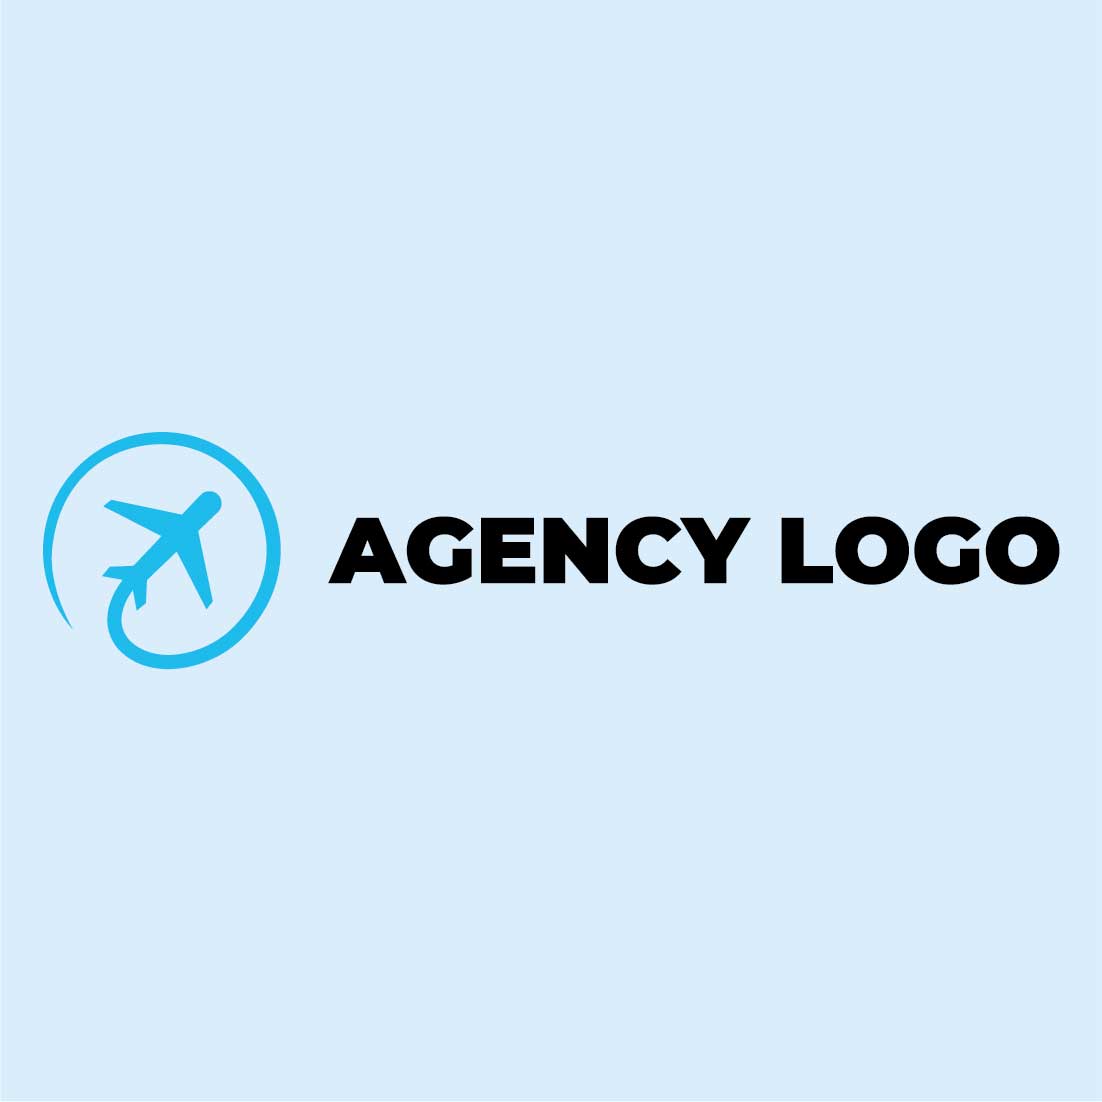 Vector logo design templates for airlines, airplane tickets, travel agencies, Agency Logo - planes and emblems pinterest preview image.